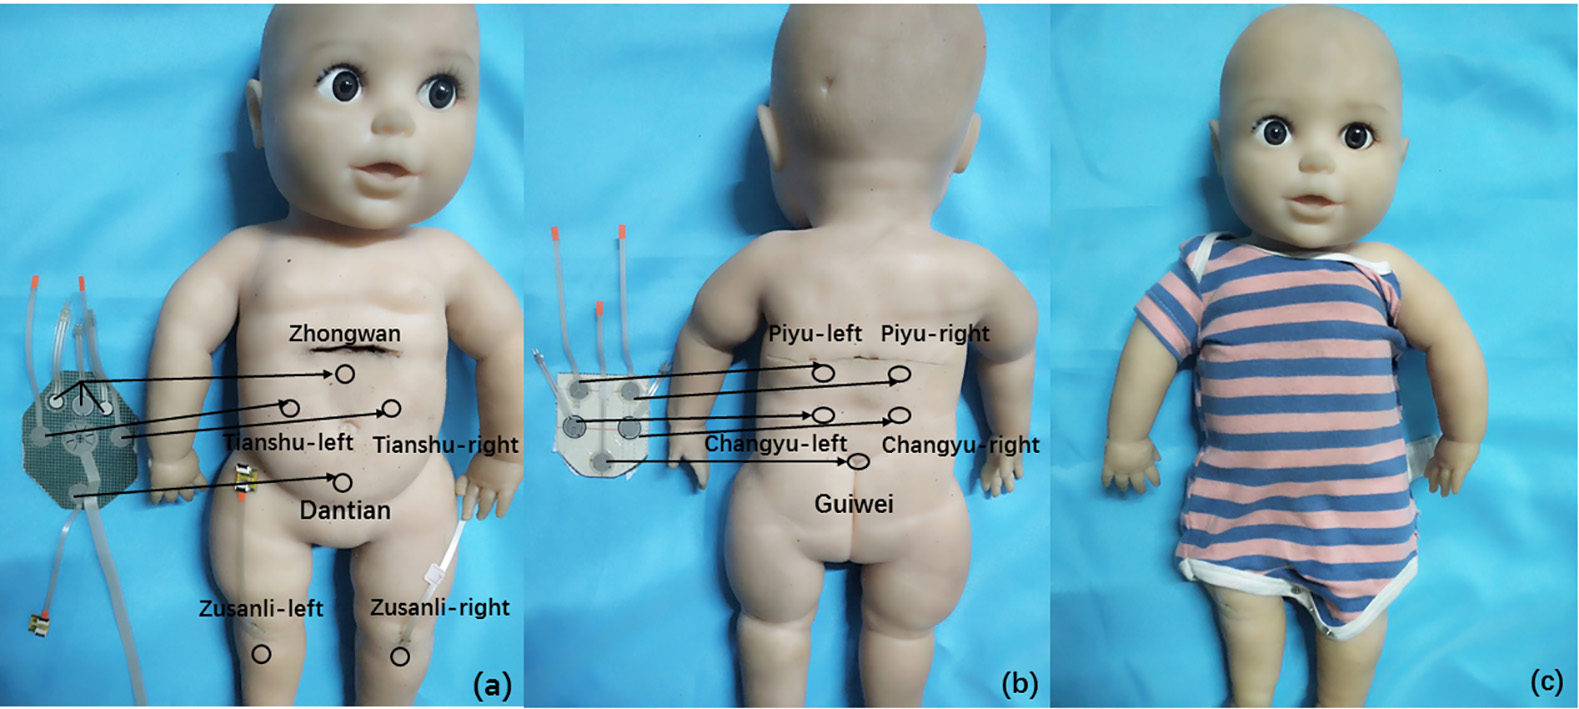 Pressure sensor distribution. (a) Acupuncture points on the abdomen and lower limbs, (b) Acupuncture points on the back, (c) The baby model.